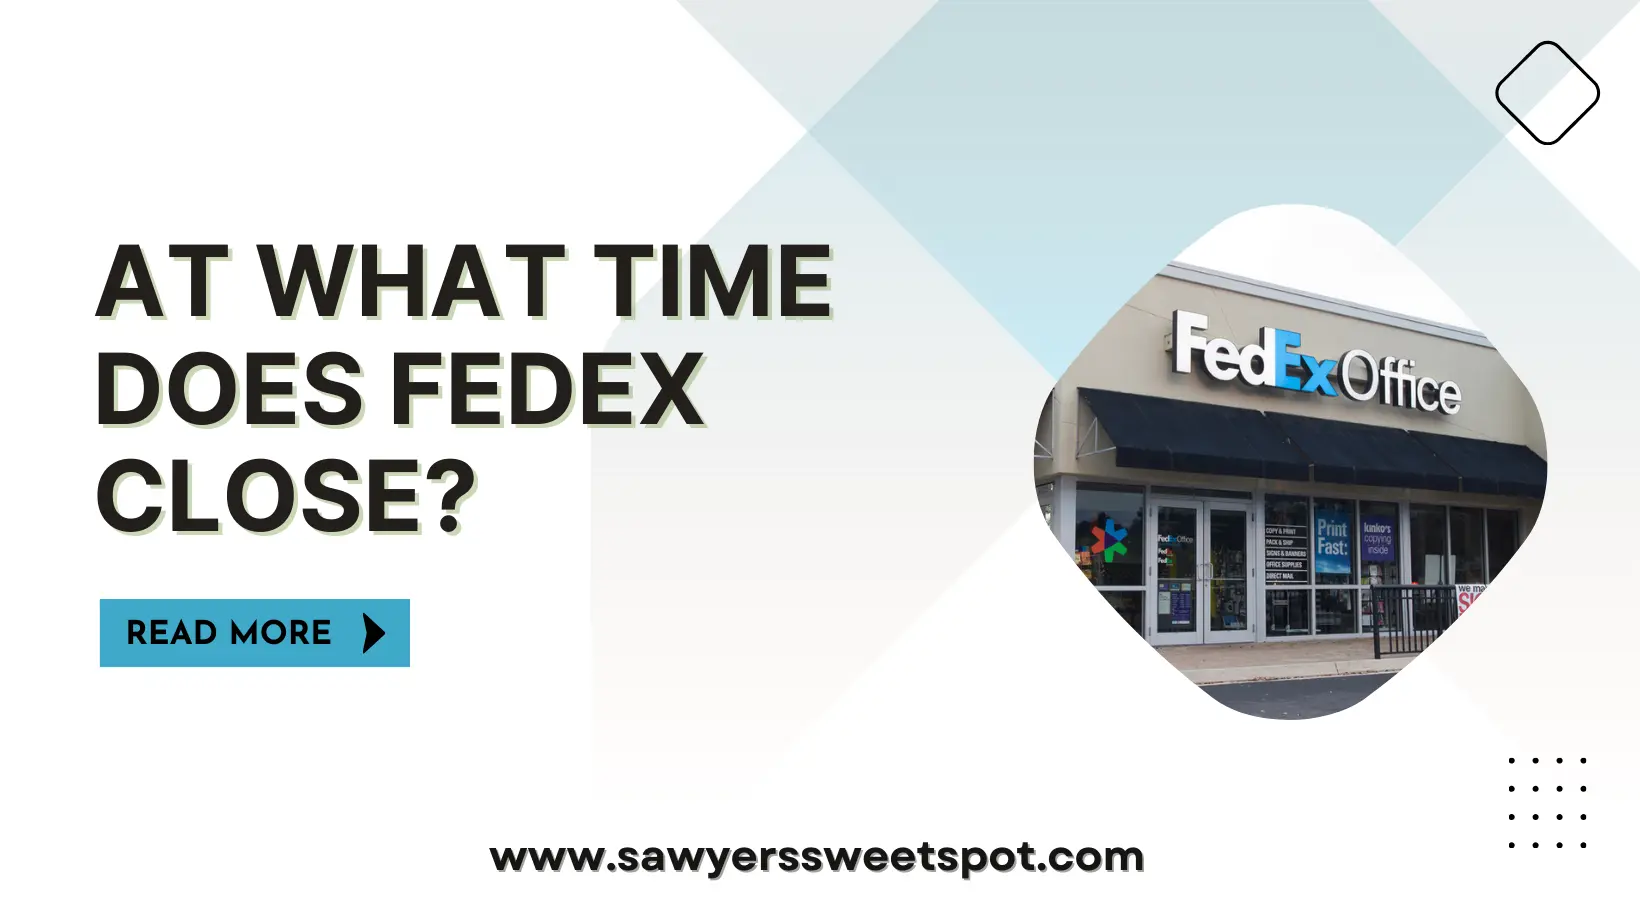 At What Time Does Fedex Close?